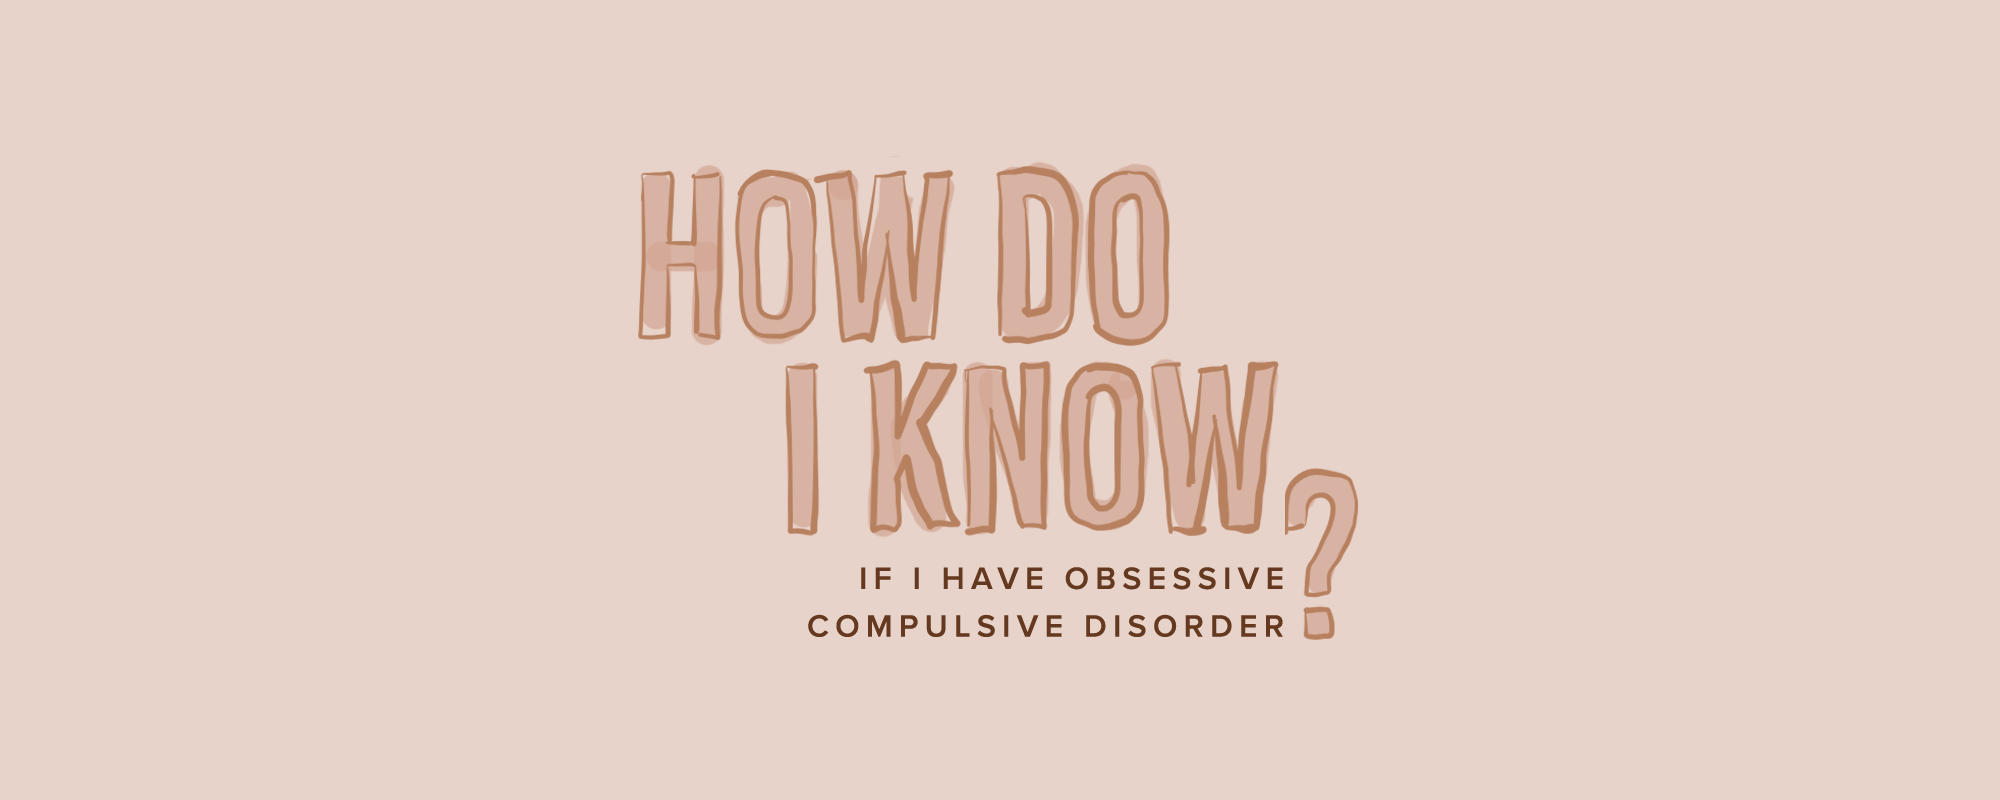 How Do I know If I Have Obsessive Compulsive Disorder?